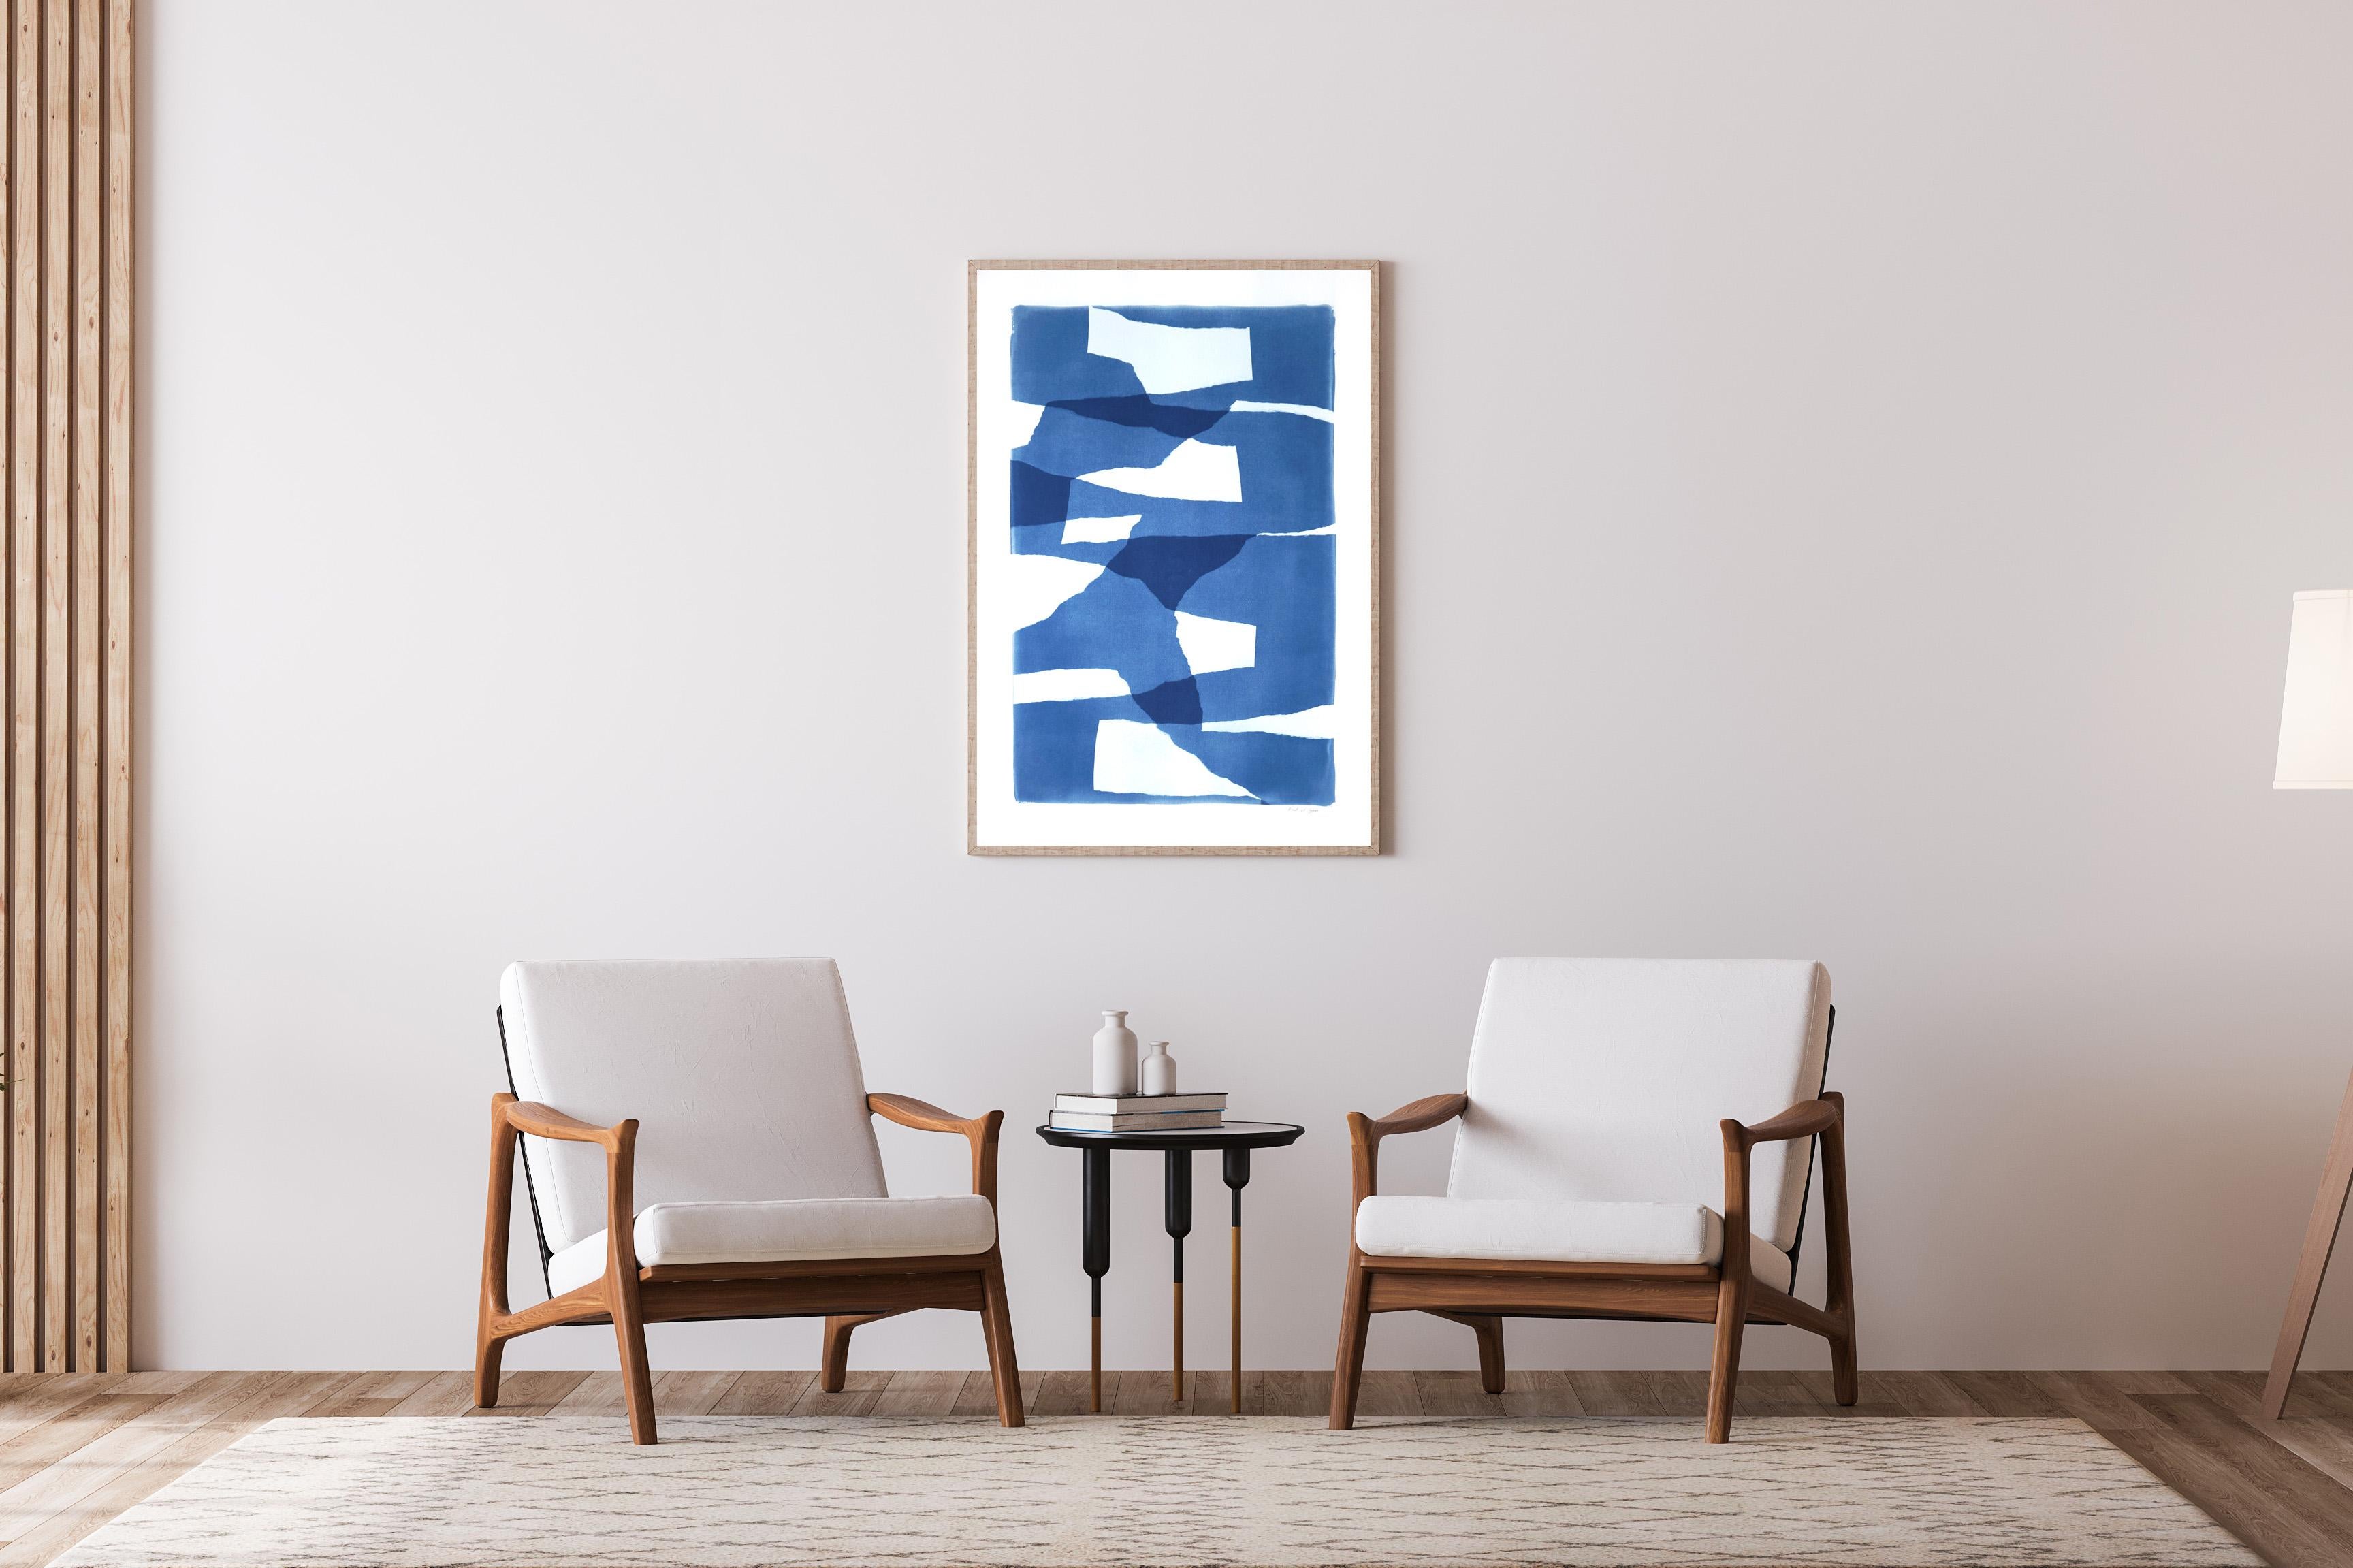 Layered Torn Paper, White and Blue Unique Print, Abstract Construction Shapes 1